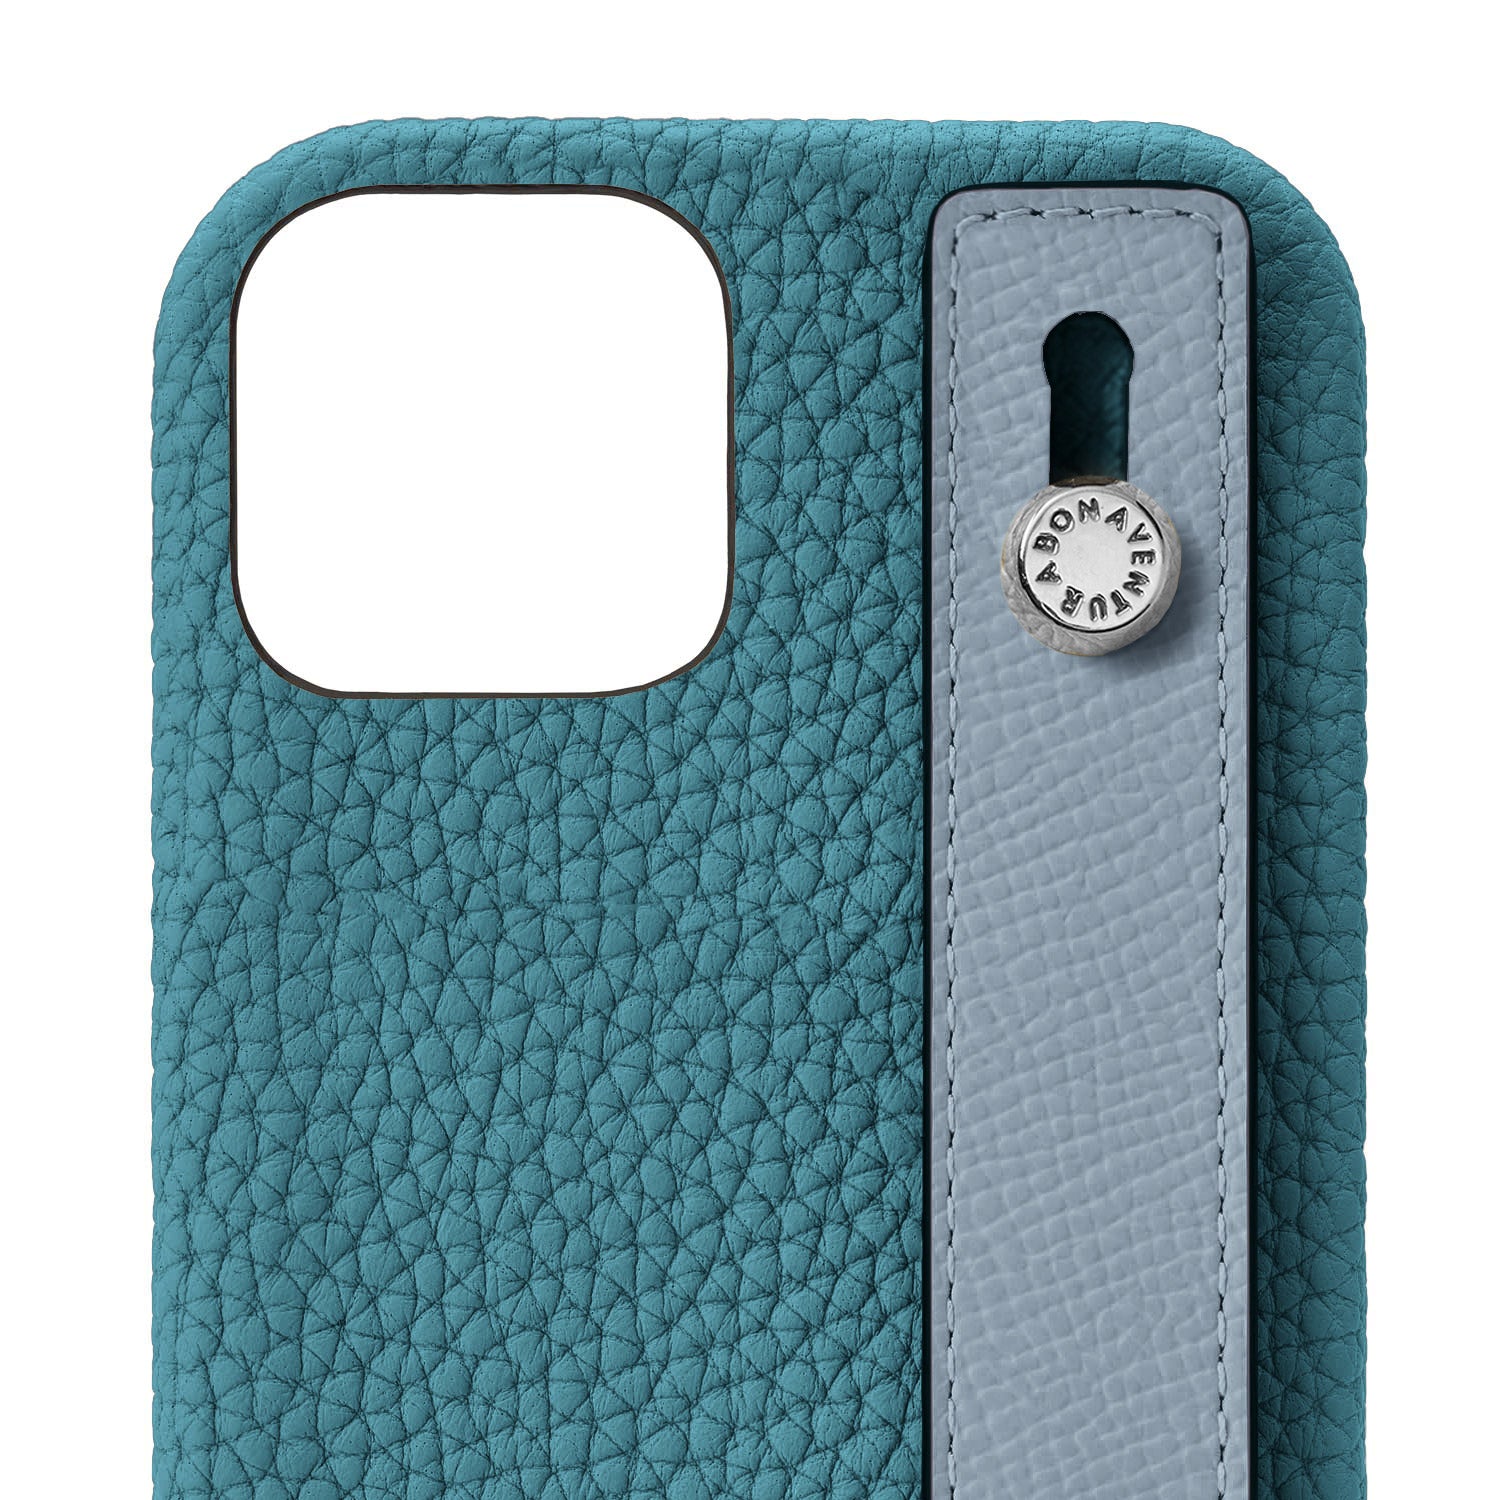 (iPhone 12 / 12 Pro) Back cover case with handle, shrink leather